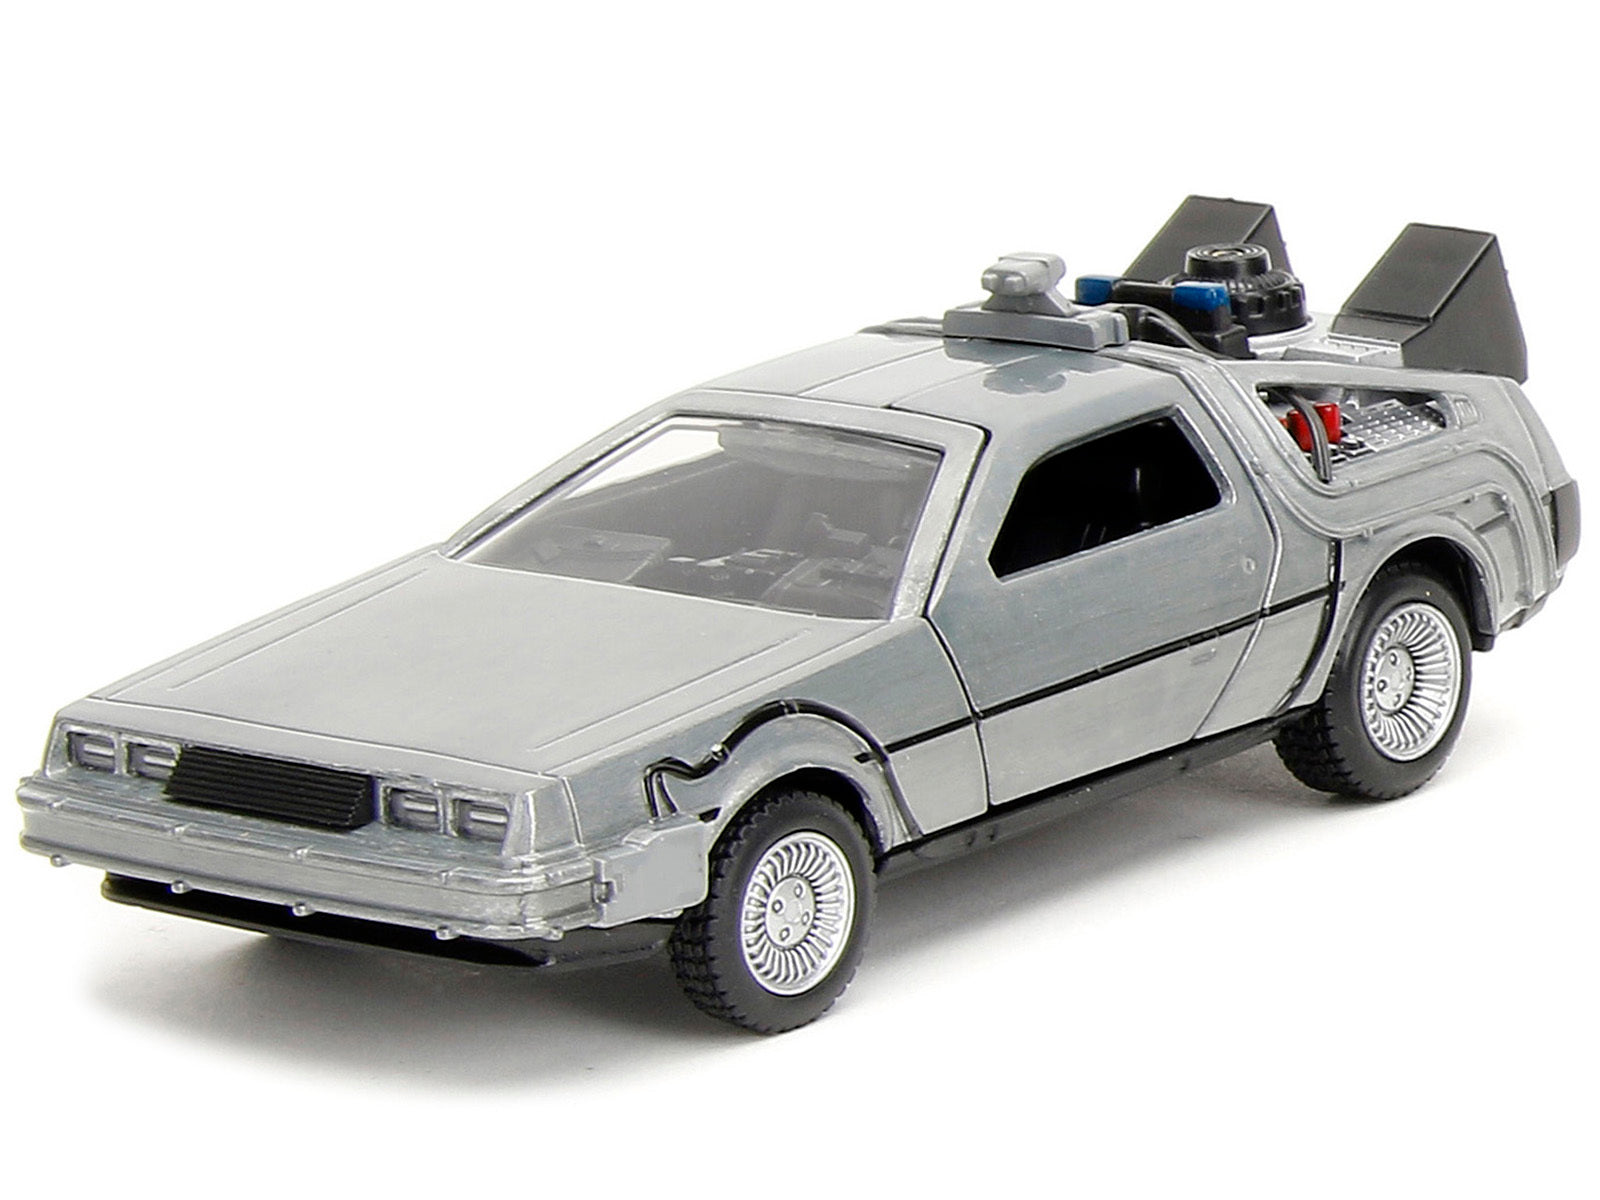 "Back to the Future" Delorean Set of 3 pieces "Hollywood Rides" Series 1/32 Diecast Model Car by Jada